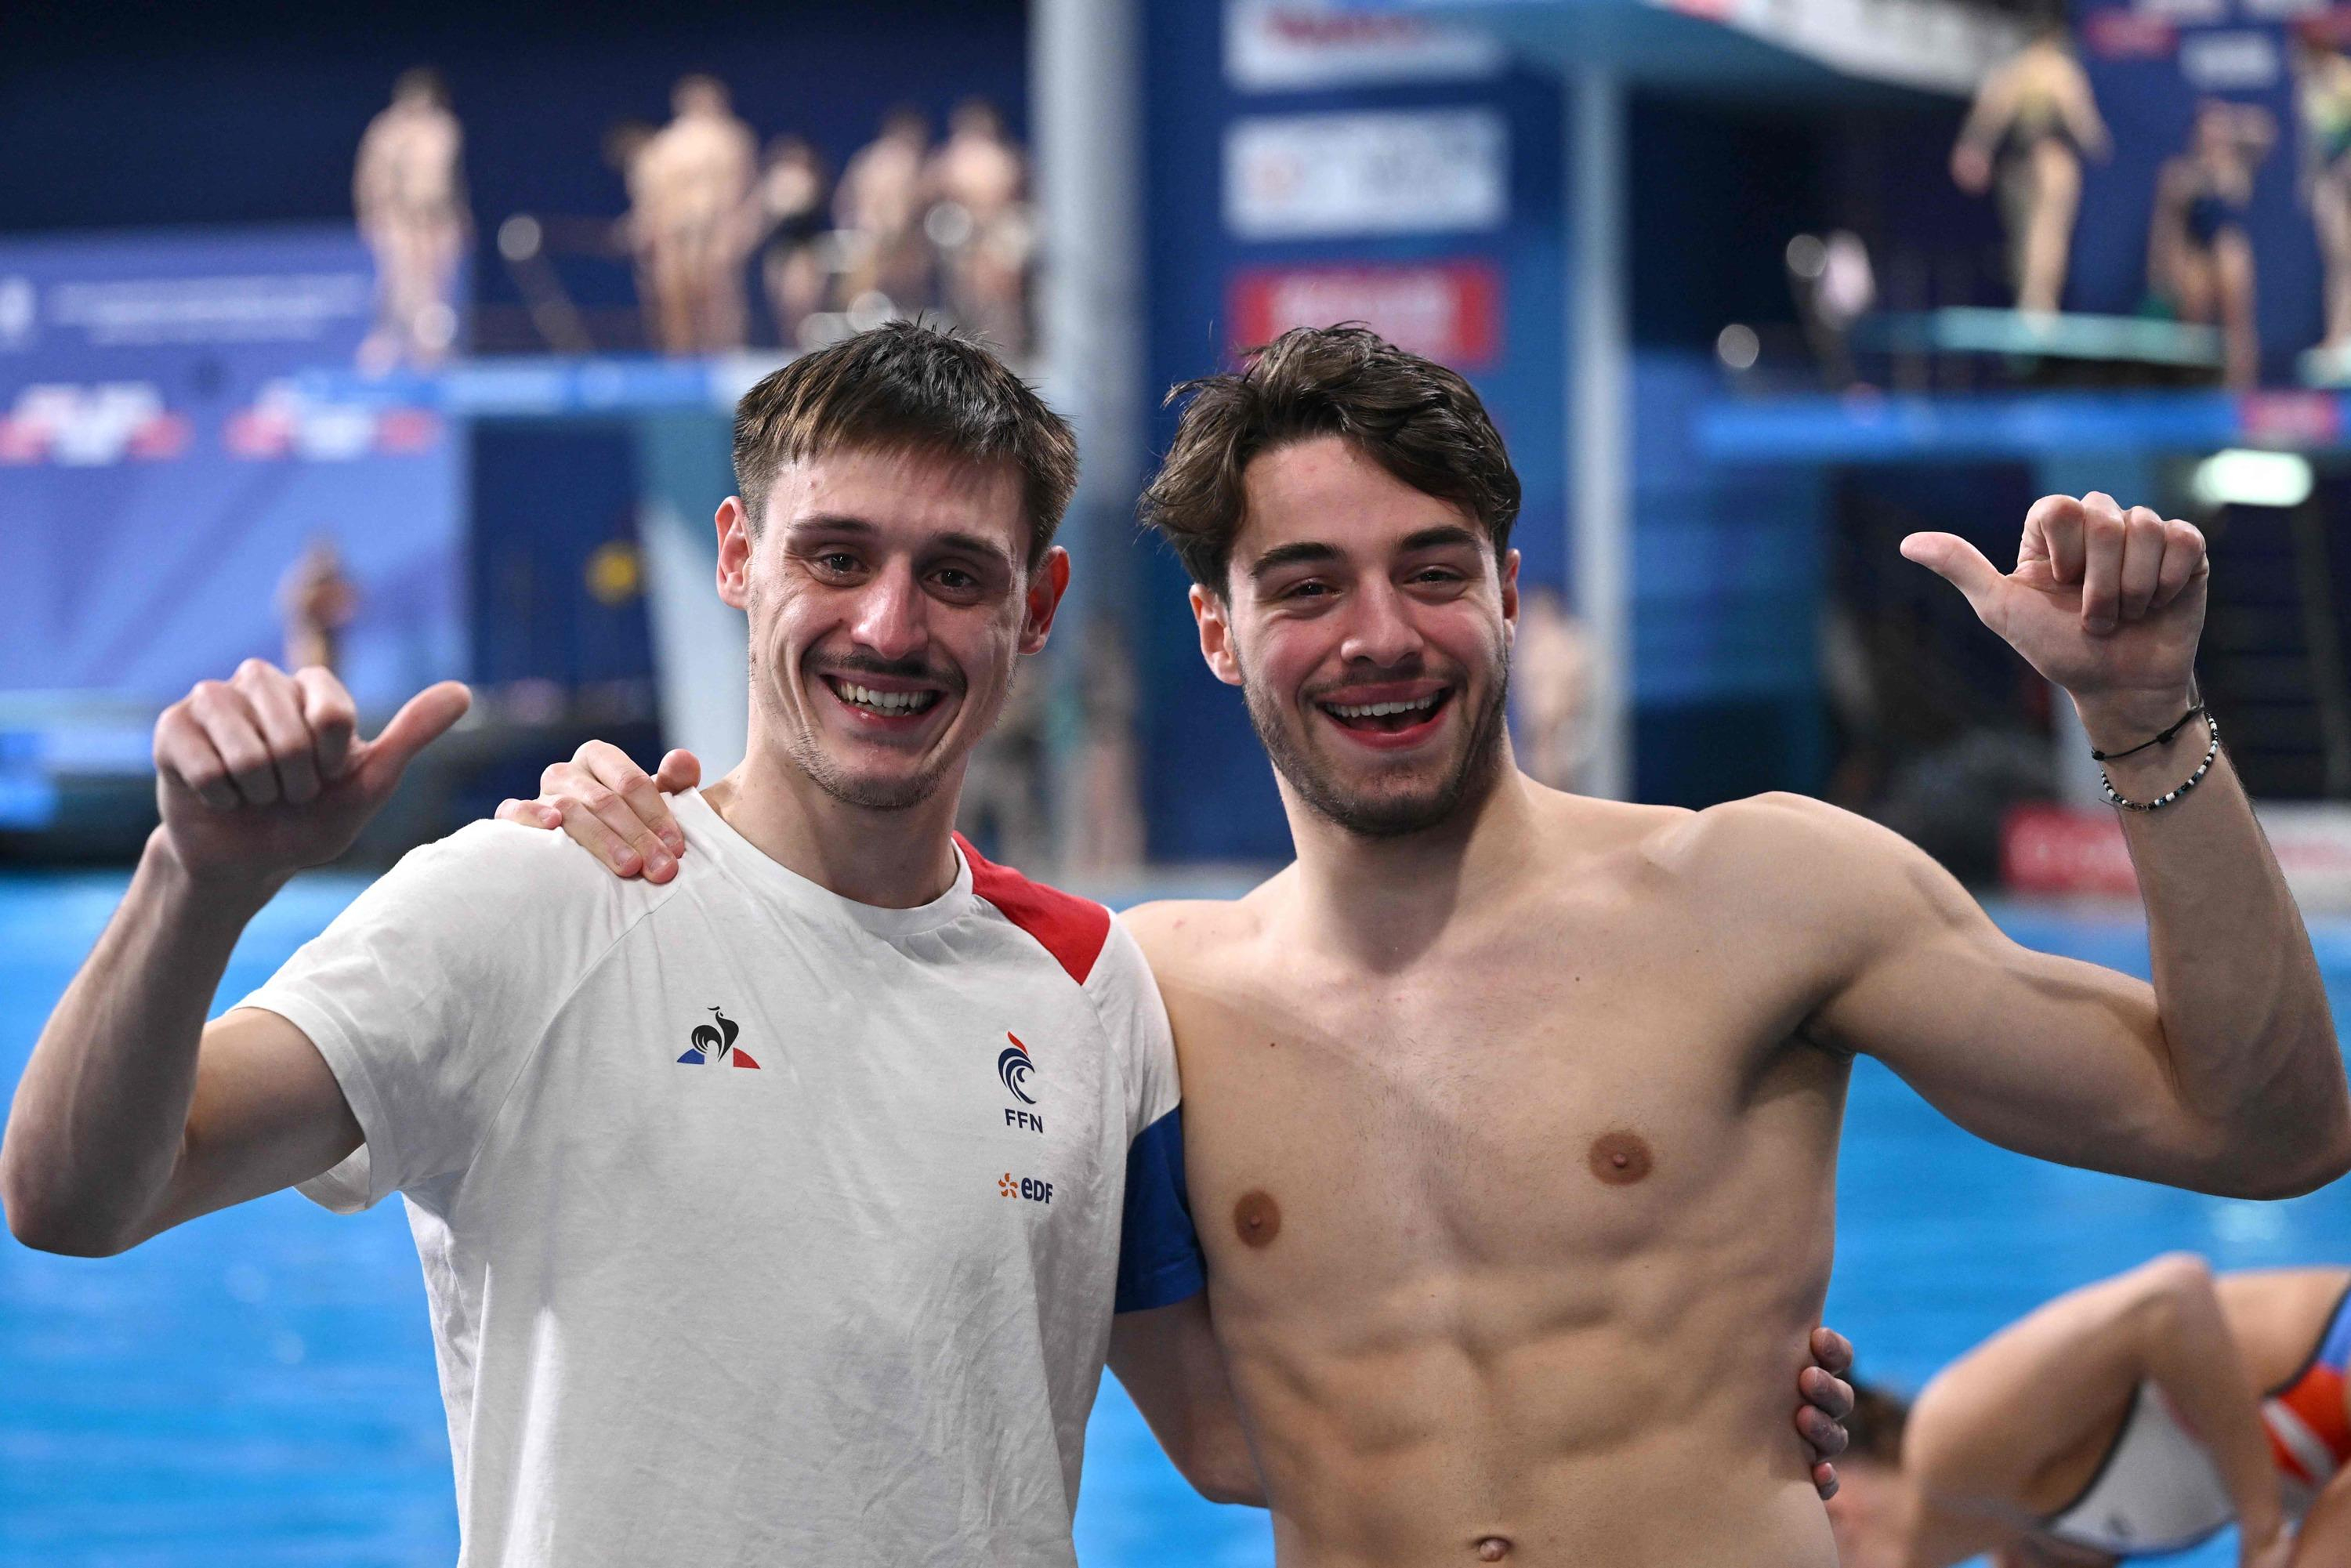 Diving: Frenchmen Jules Bouyer and Gwendal Bisch qualified for the Olympics